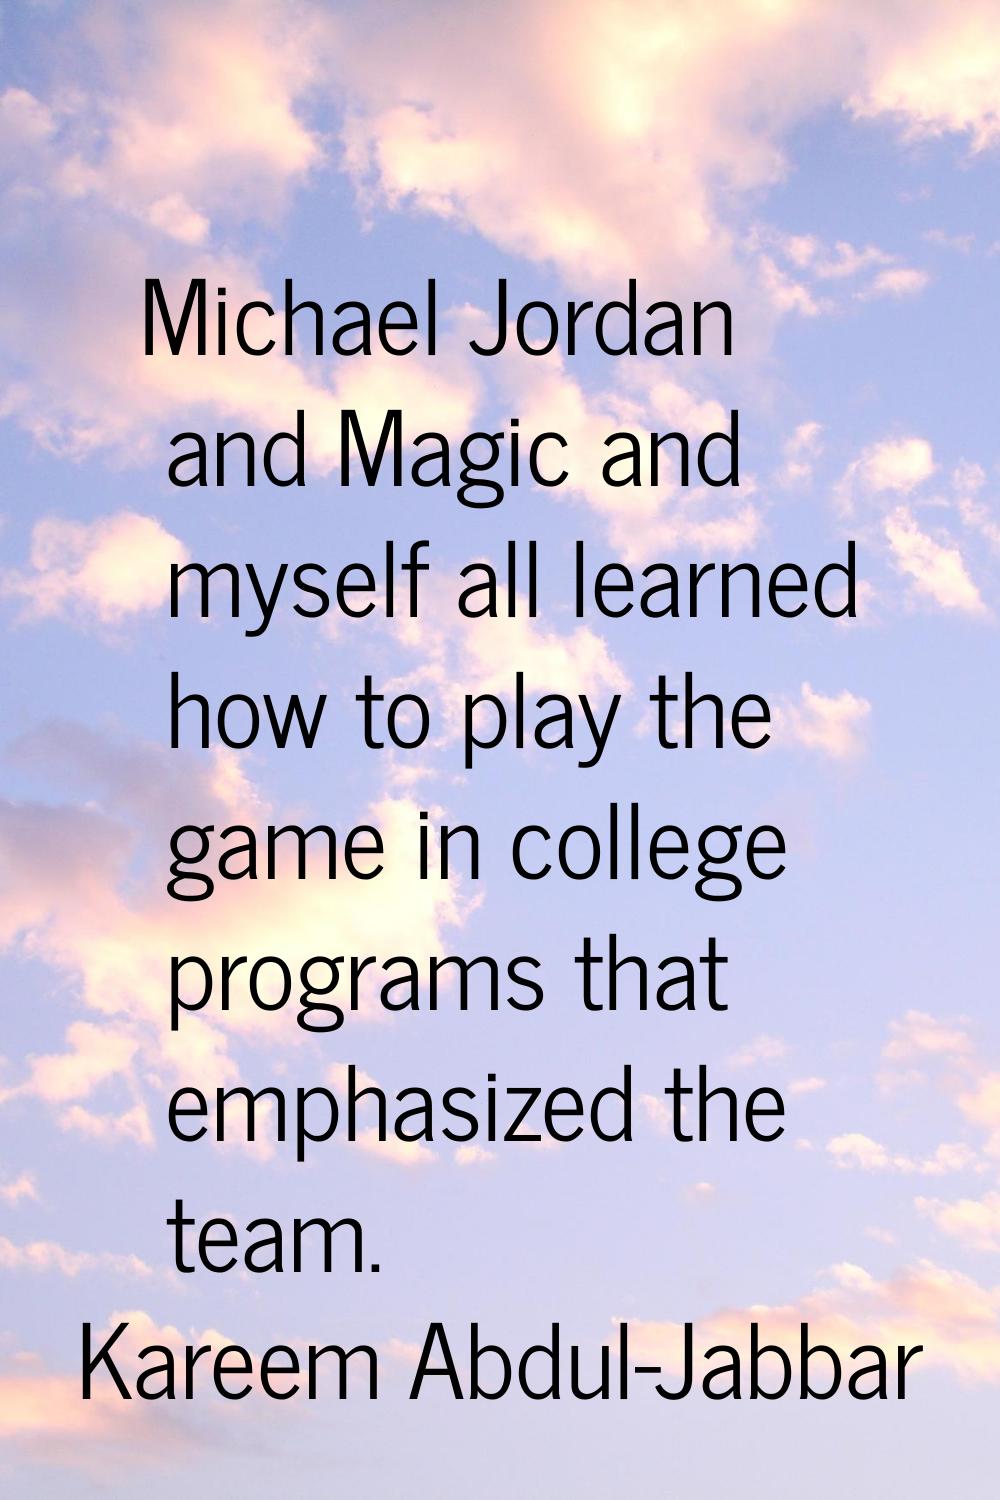 Michael Jordan and Magic and myself all learned how to play the game in college programs that empha